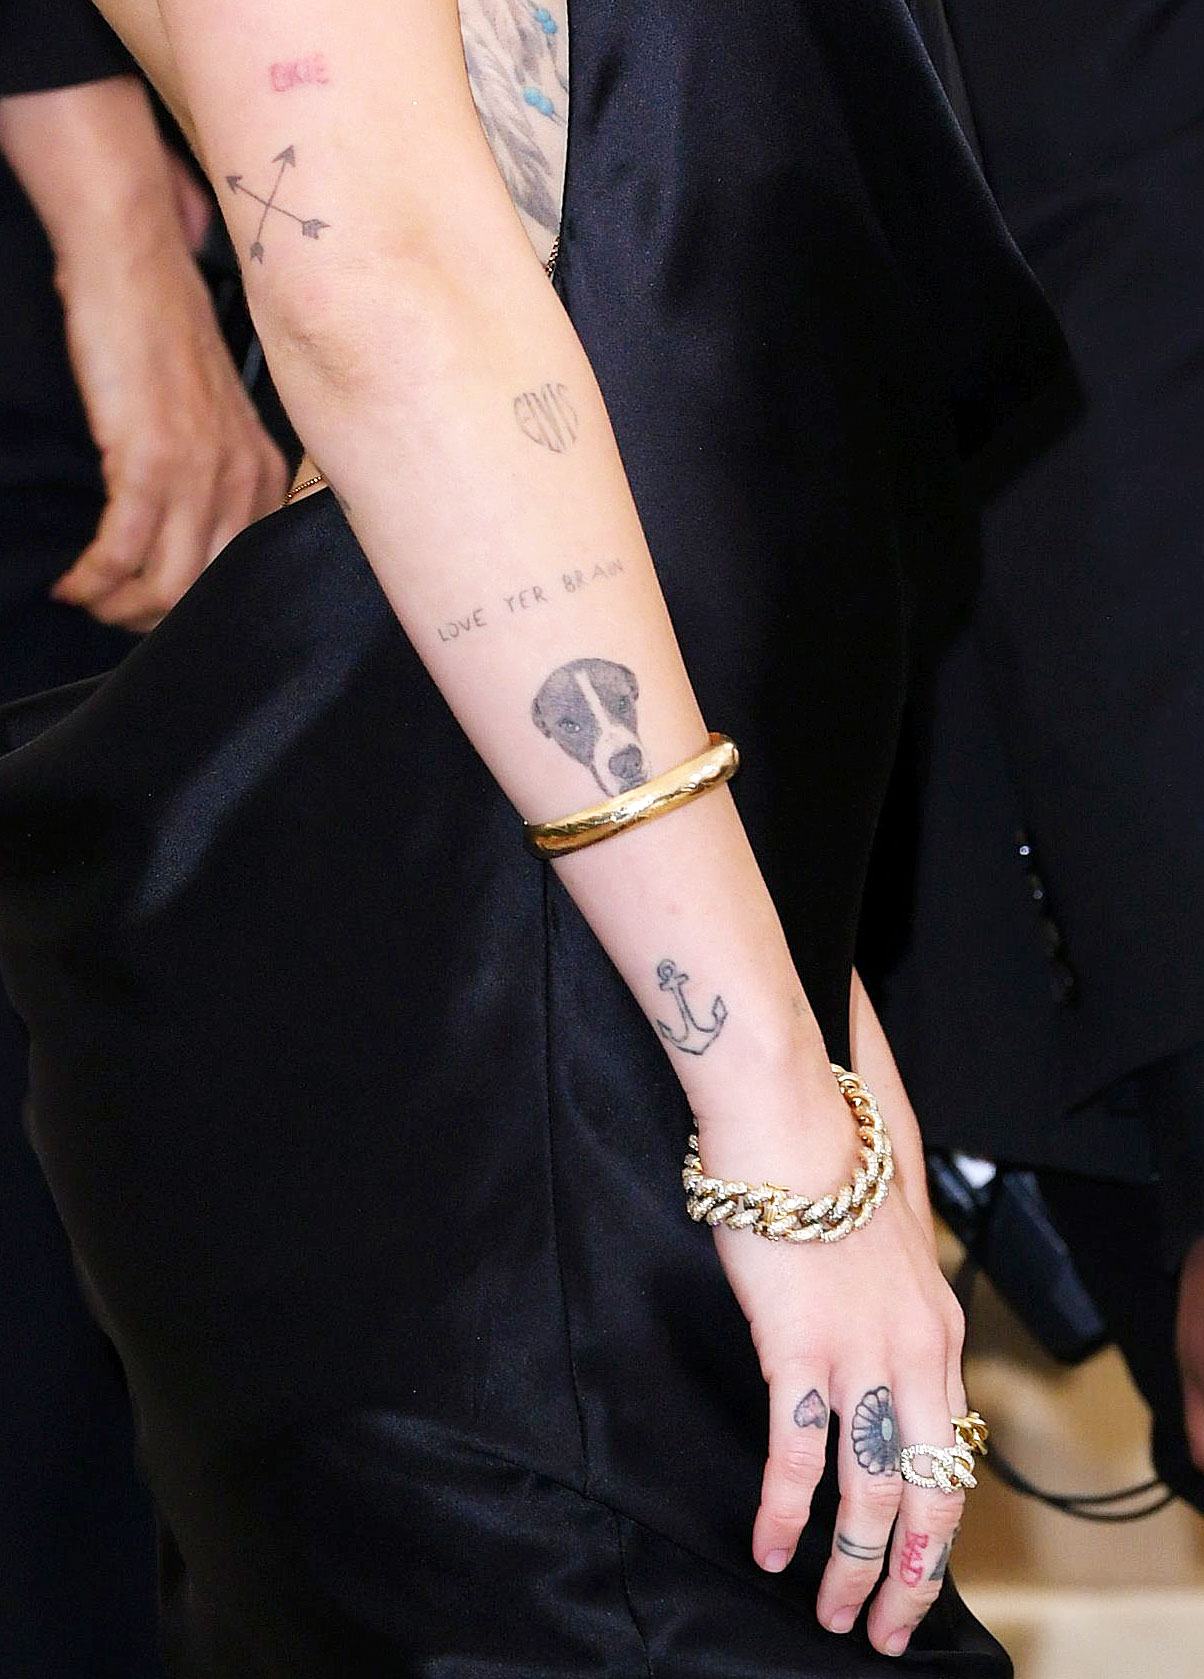 Miley Cyrus' Tattoos Guide to All Her Ink and Their Meanings